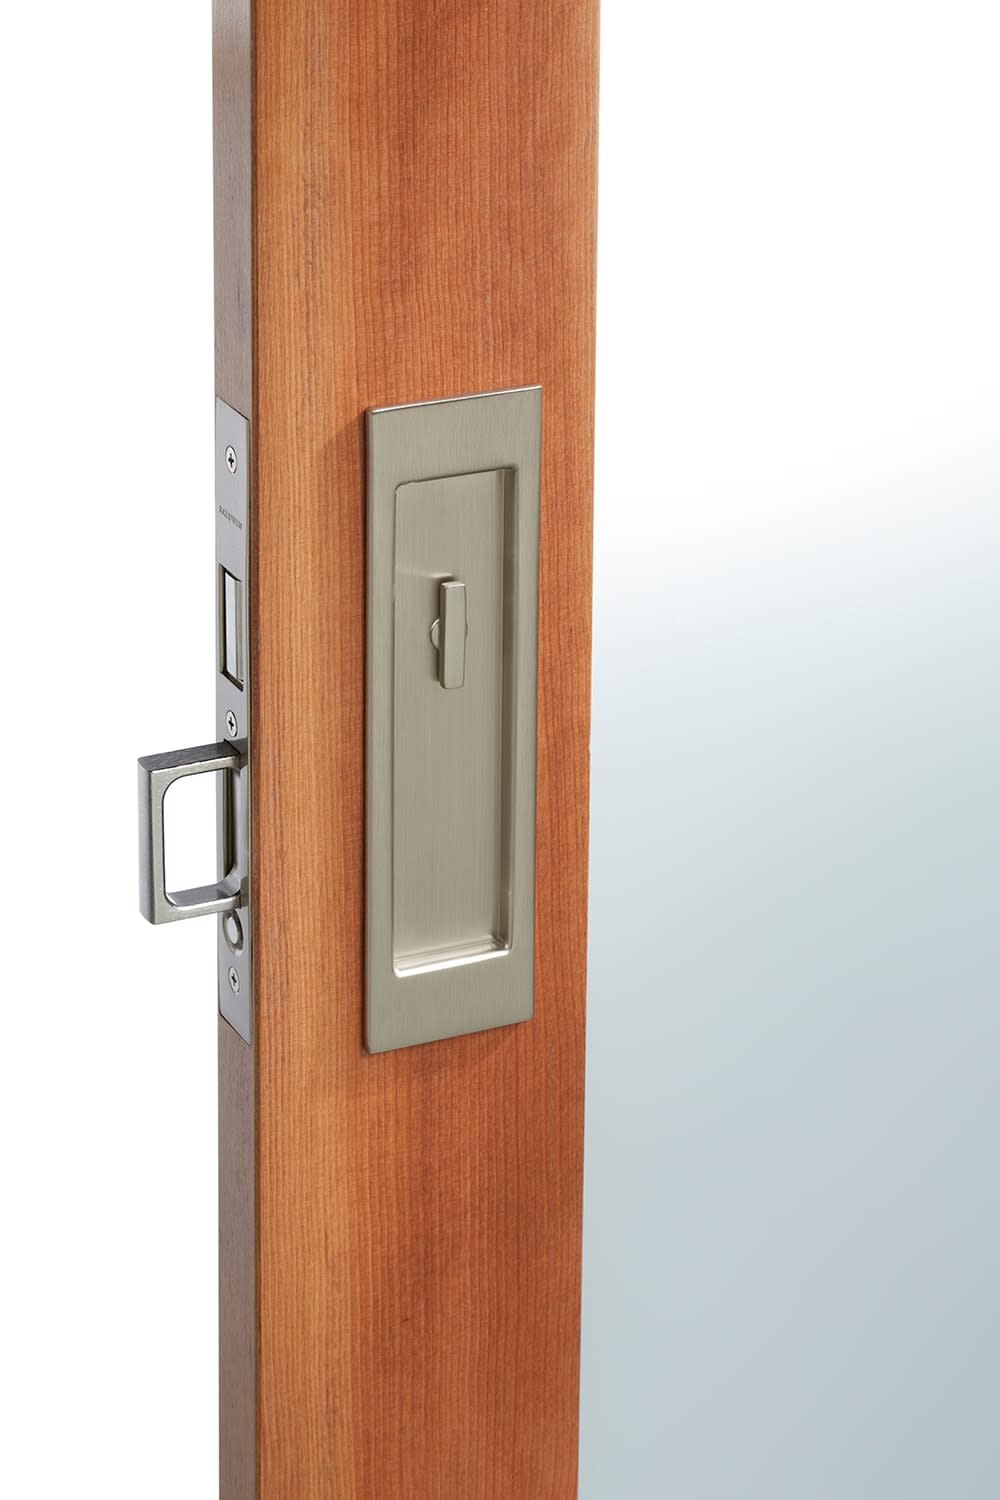 Baldwin Pd005.Priv Santa Monica Privacy Pocket Door Lock From The Estate Collection - - image 3 of 7